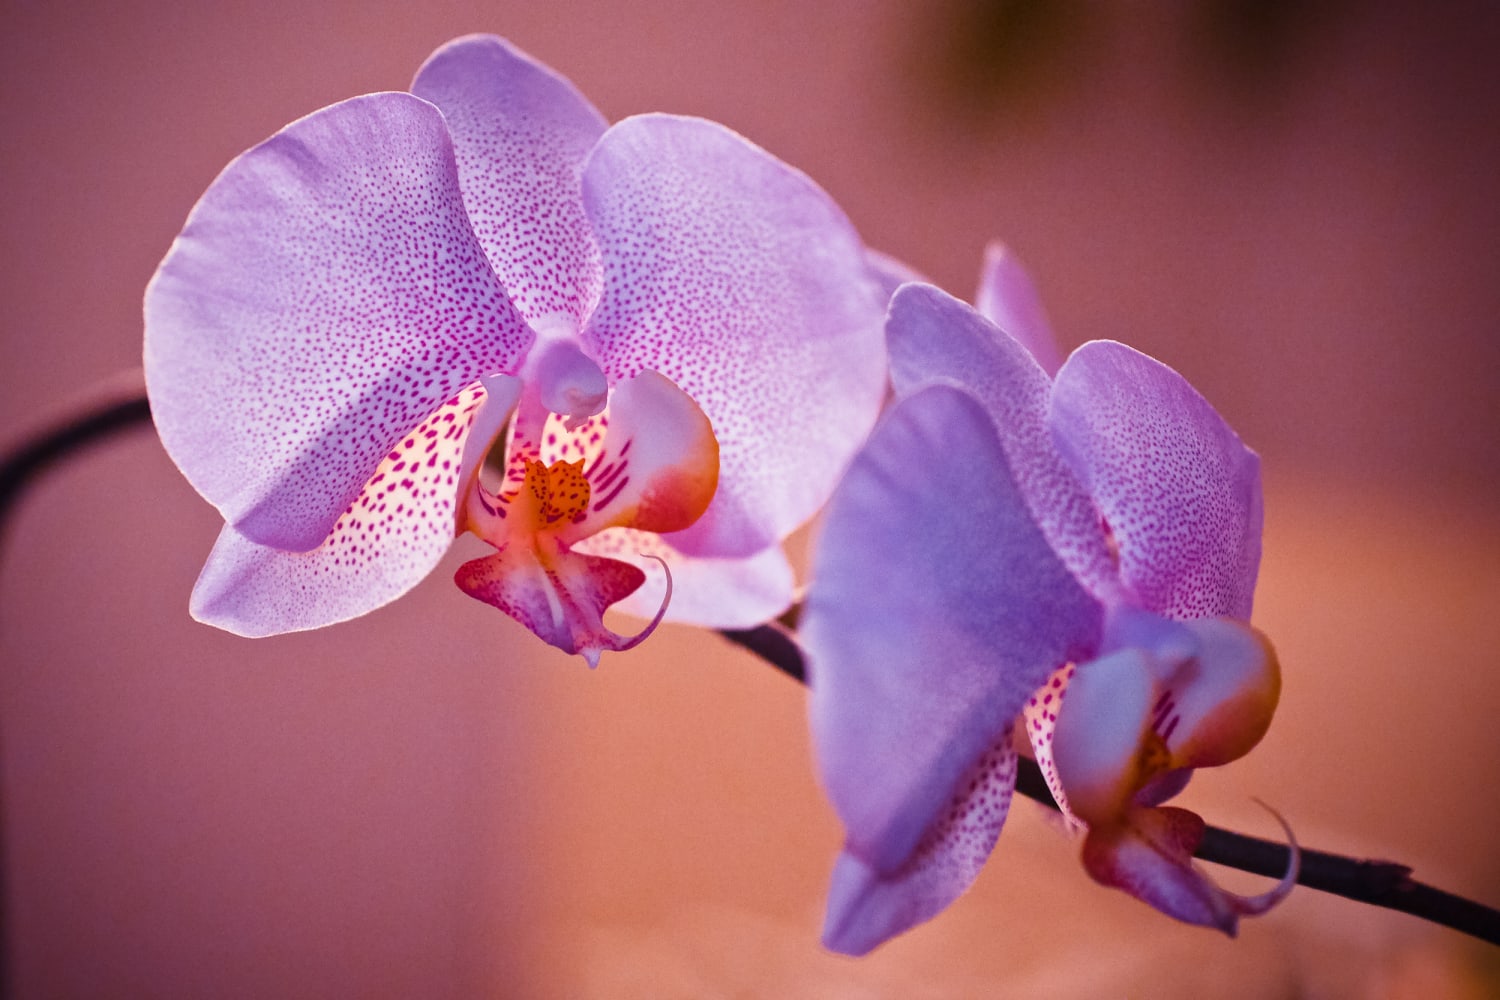 How to care for an orchid plant